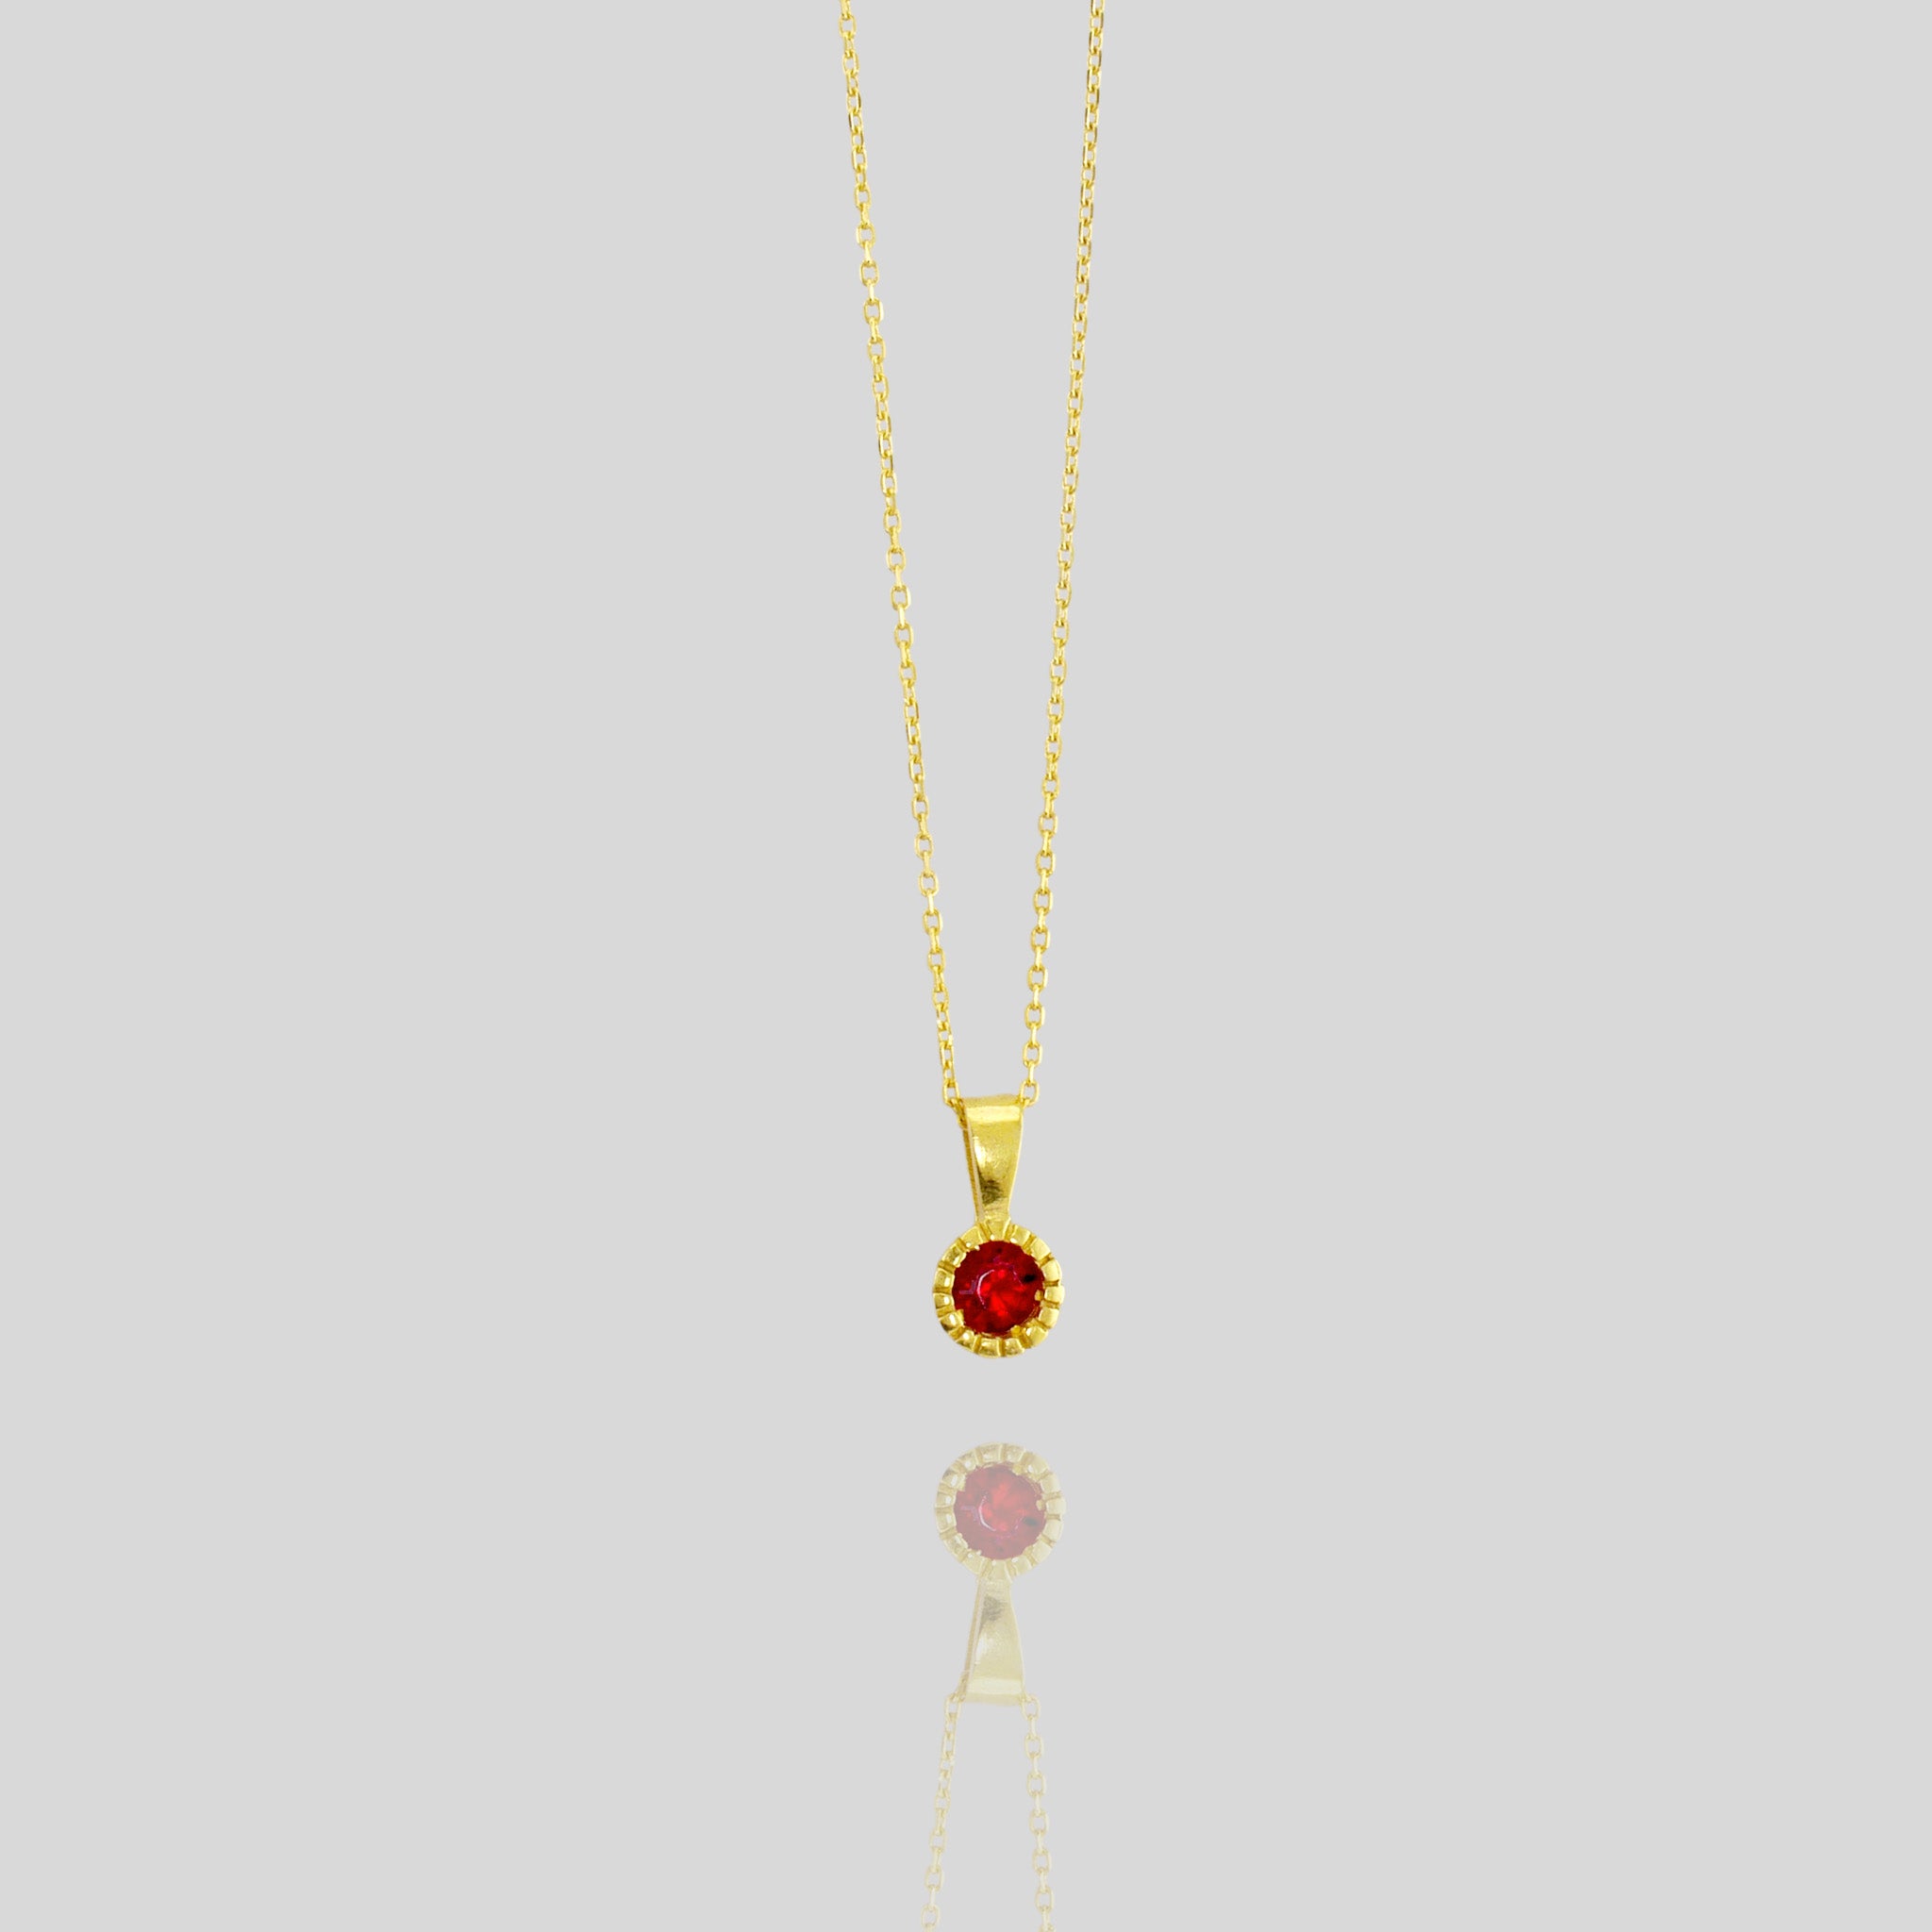 Elegant round gold pendant with embroidered texture and central Ruby, exuding classic sophistication.